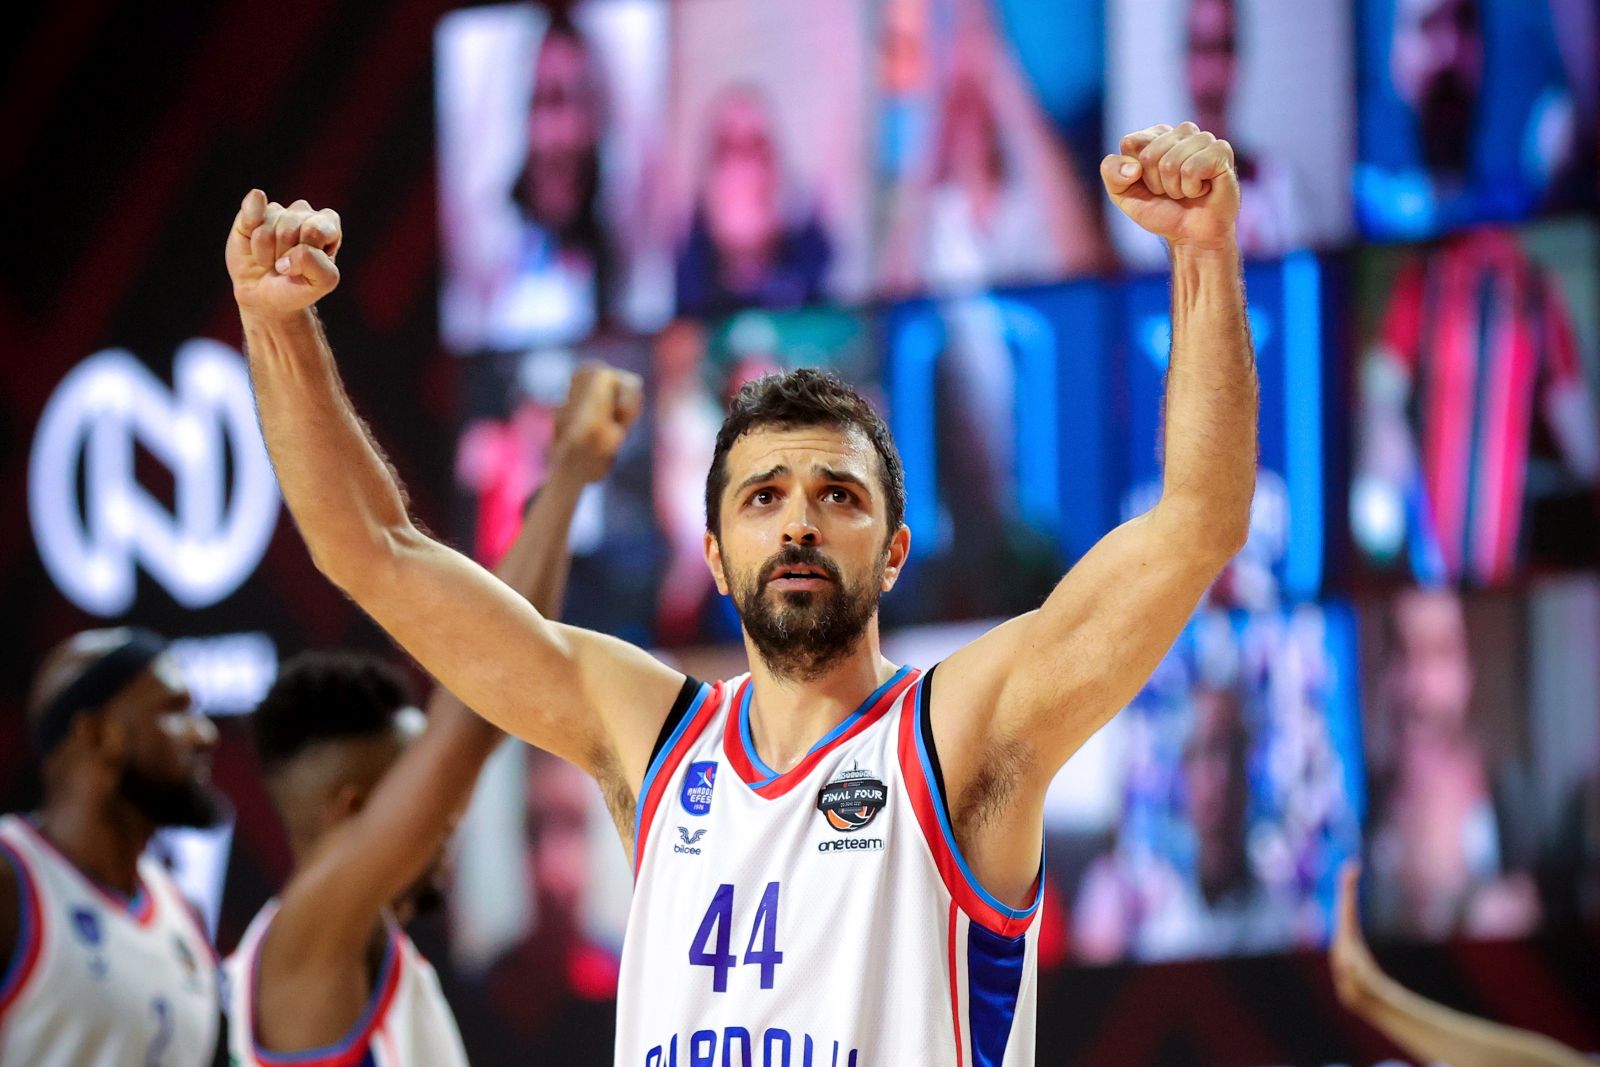 epa09233953 Krunoslav Simon of Anadolu Efes Istanbul celebrates after winning the EuroLeague basketball semifinal match between CSKA Moscow and Anadolu Efes Istanbul in Cologne, Germany, 28 May 2021.  EPA/FRIEDEMANN VOGEL